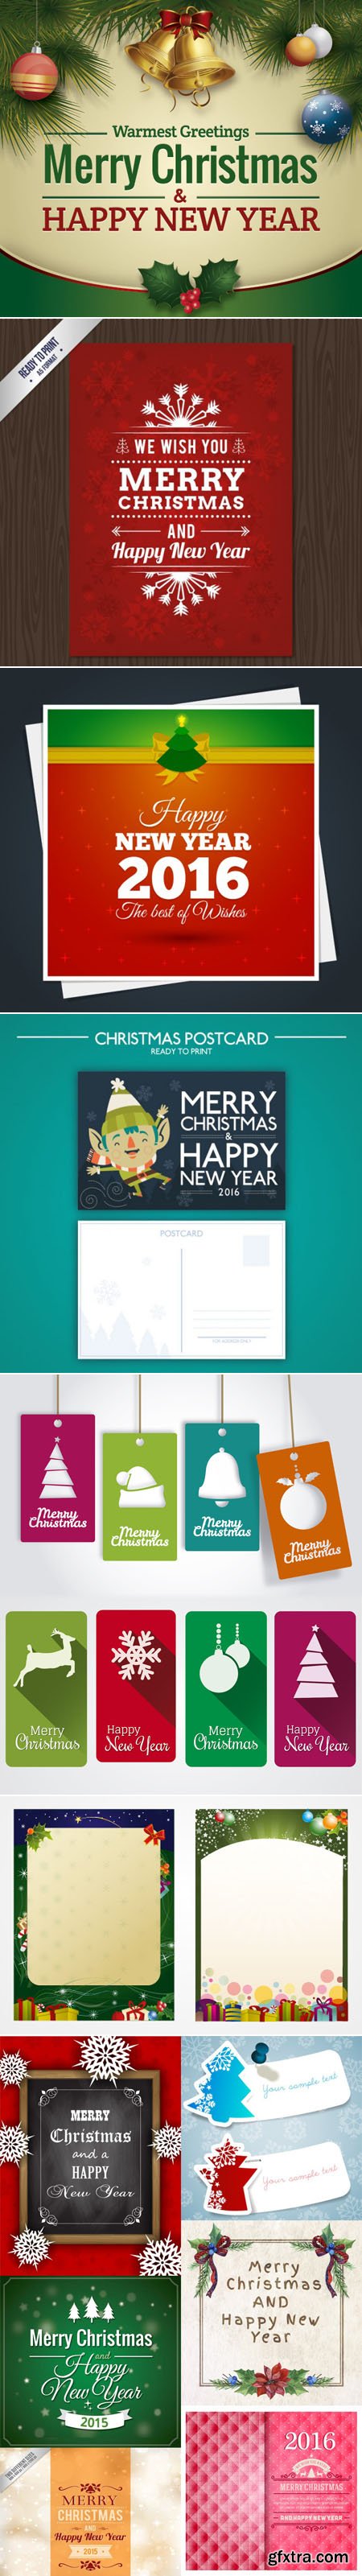 New Year 2016 Cards in Vector [Vol.4]